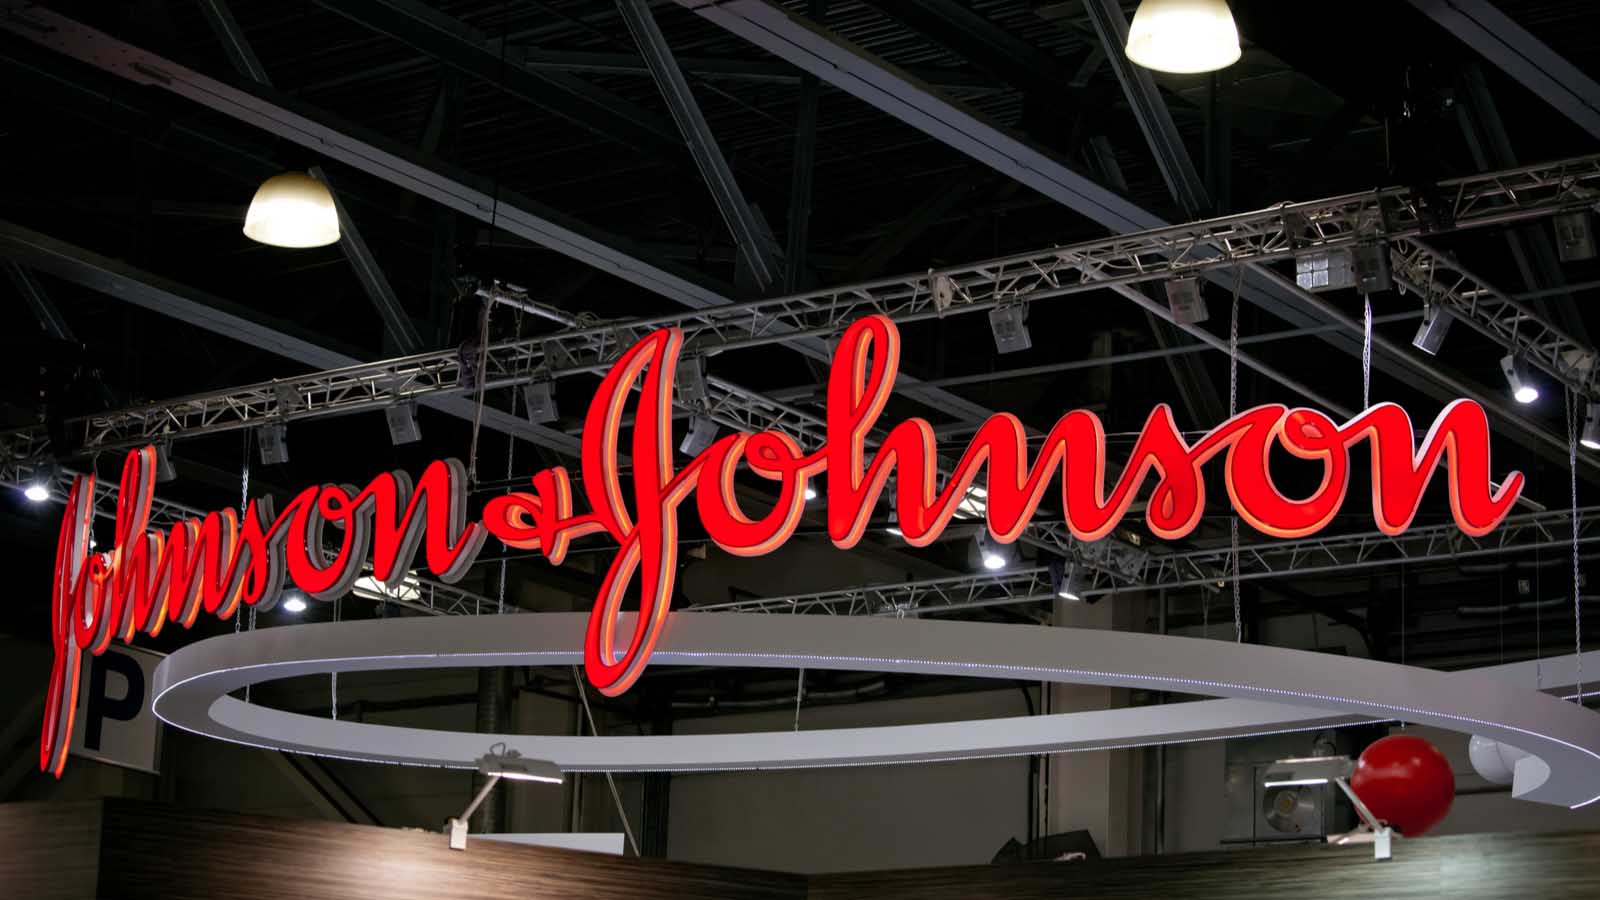 A red Johnson & Johnson (JNJ stock) sign hangs inside in Moscow, Russia.